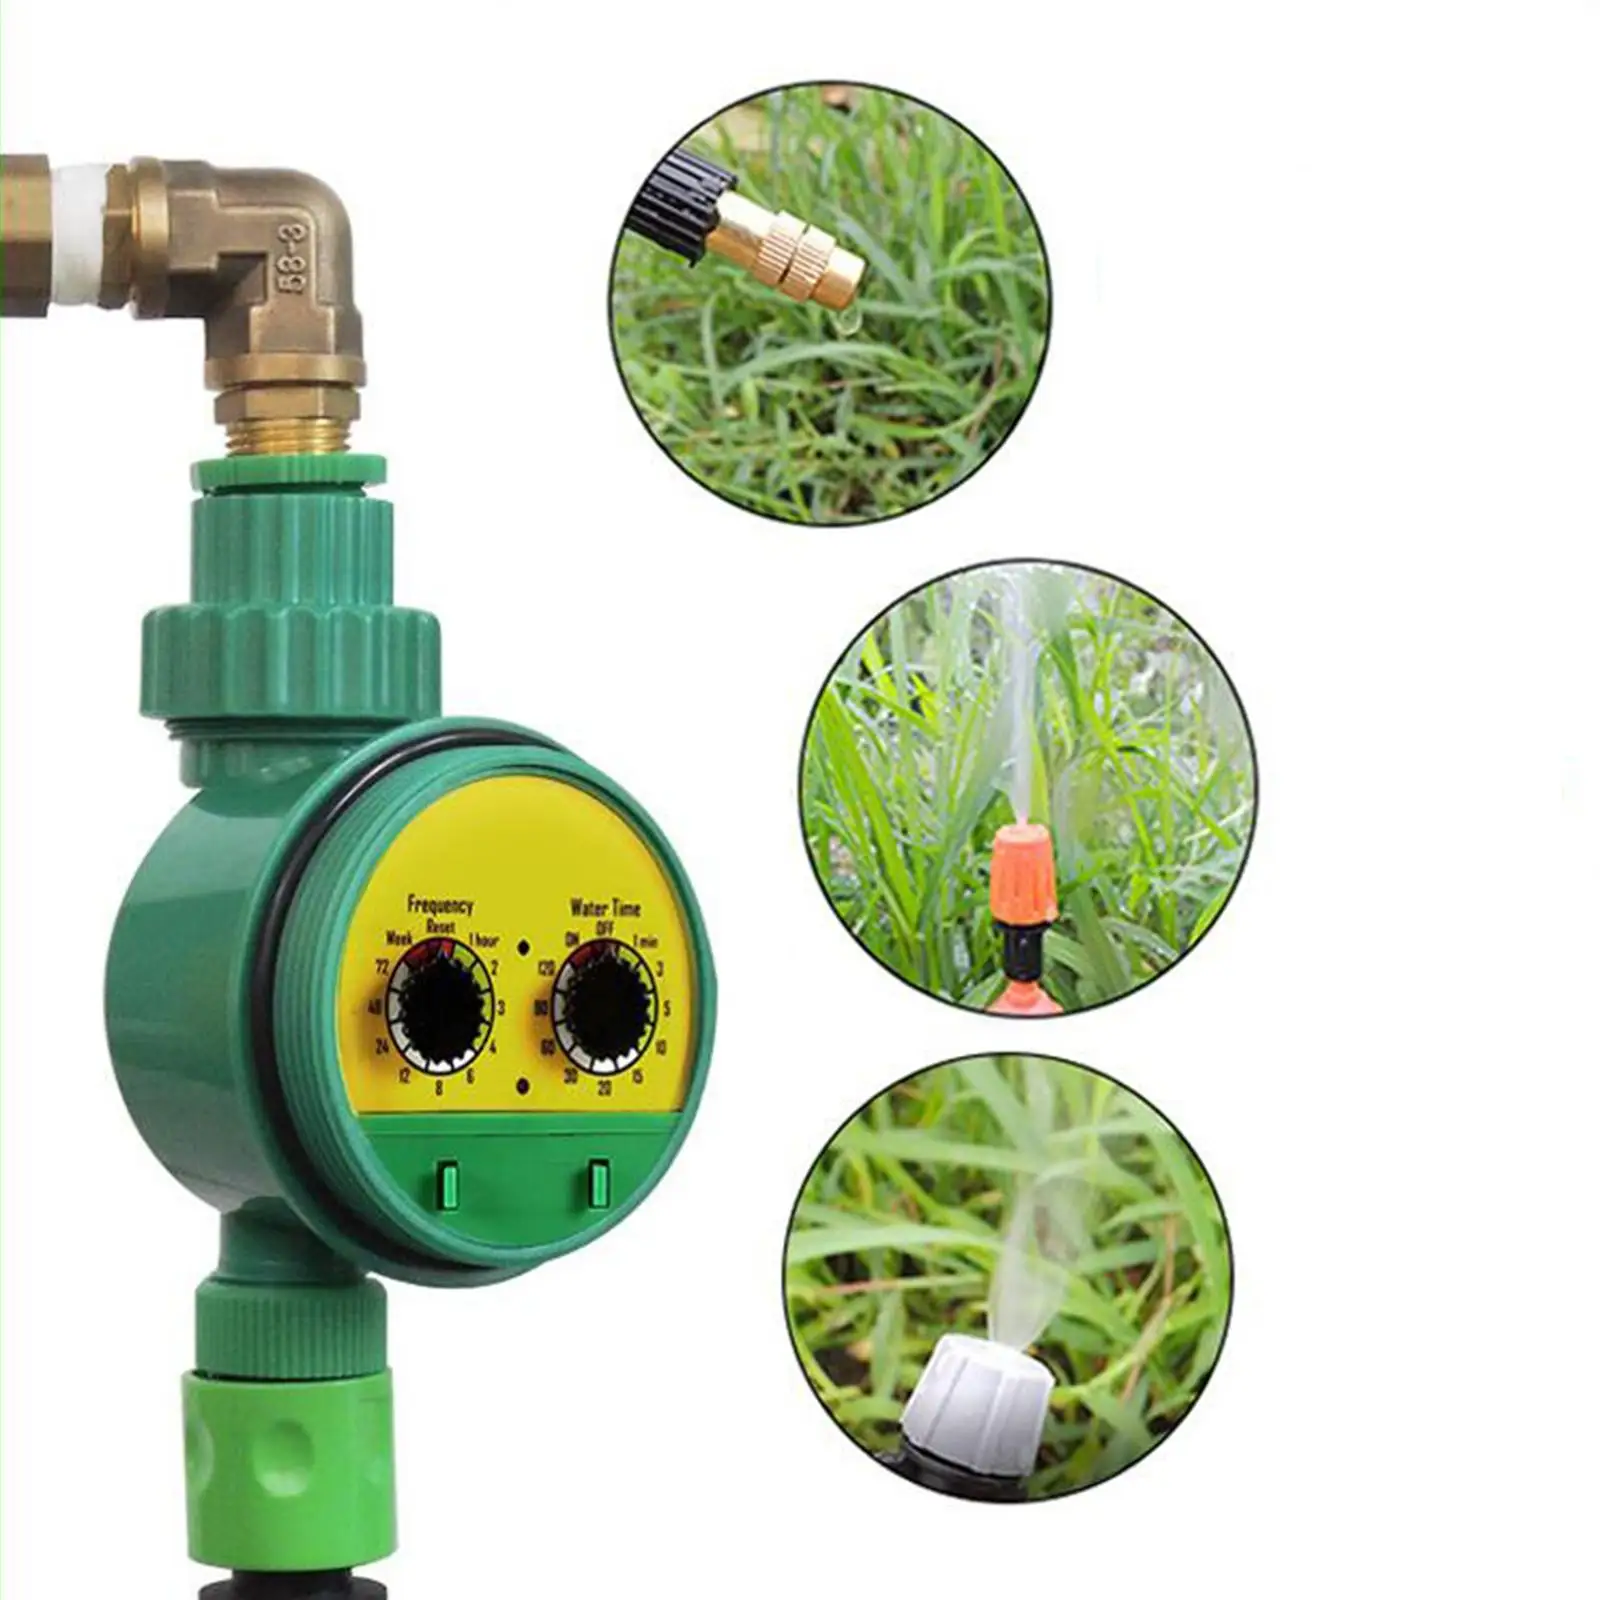 Watering Timer with LCD Display Irrigation System Intelligence Valve Waterproof Automatic Device Watering Control for Outdoor